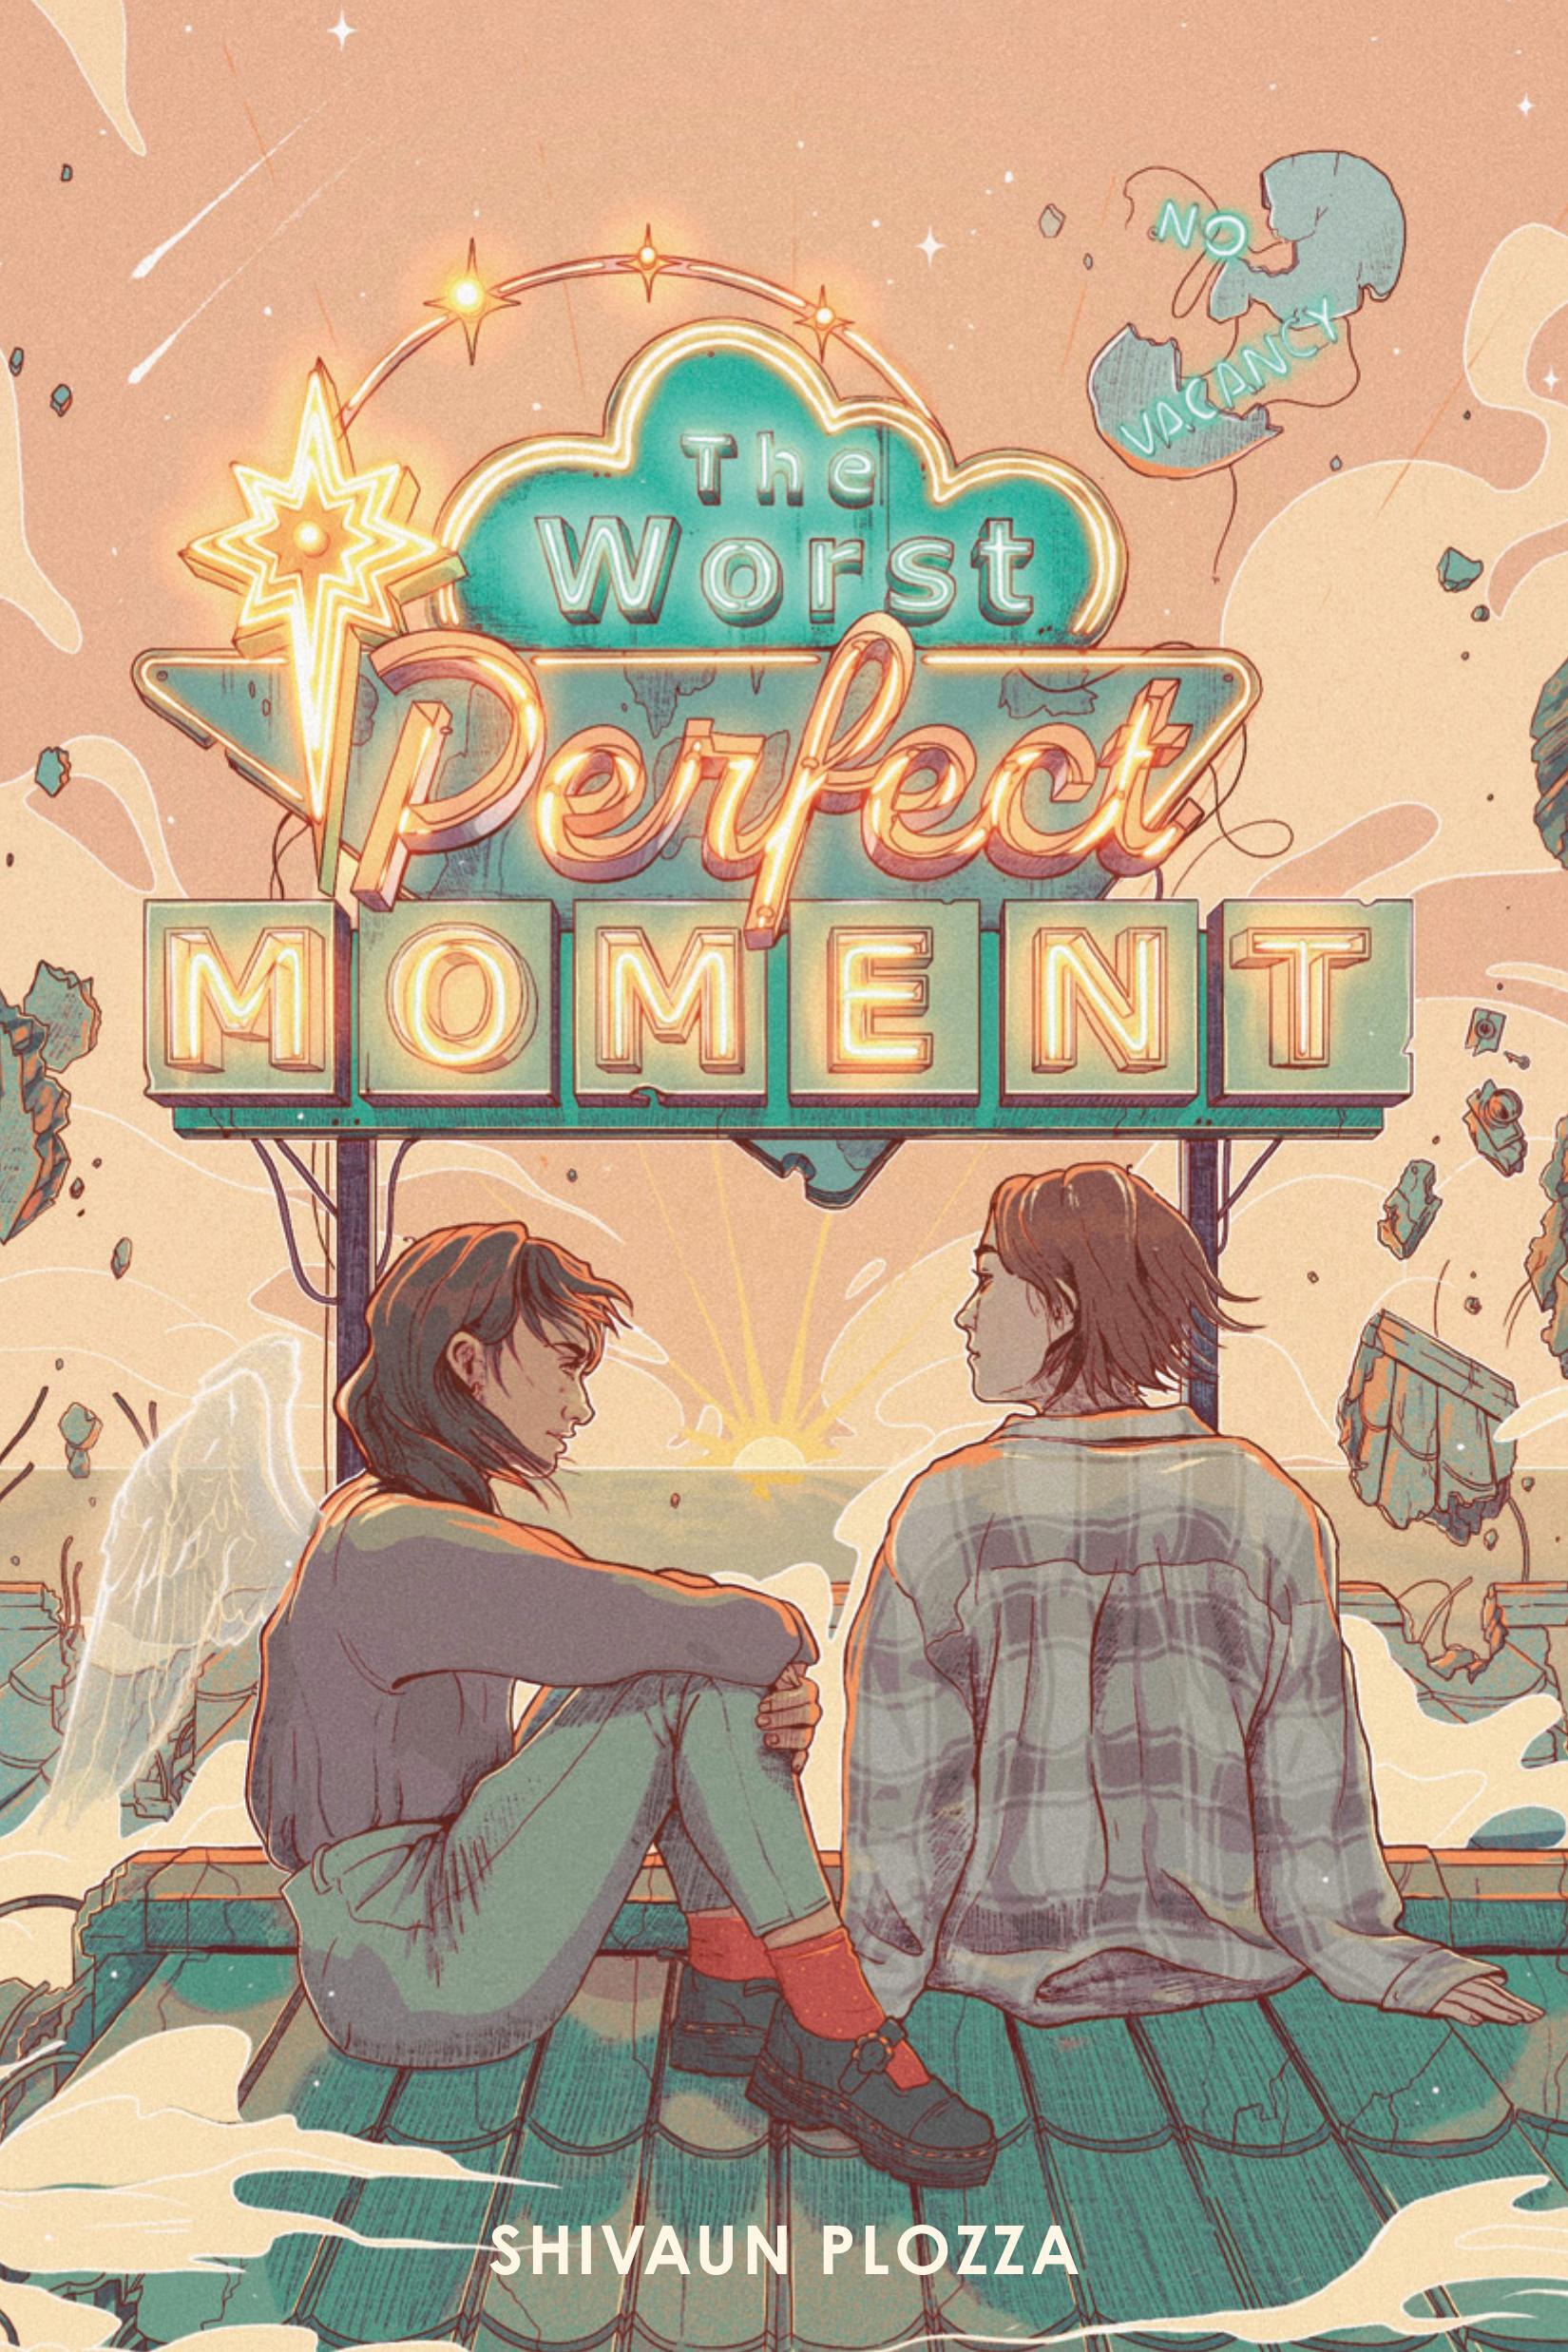 Six facts about The Worst Perfect Moment, a guest post by Shivaun Plozza